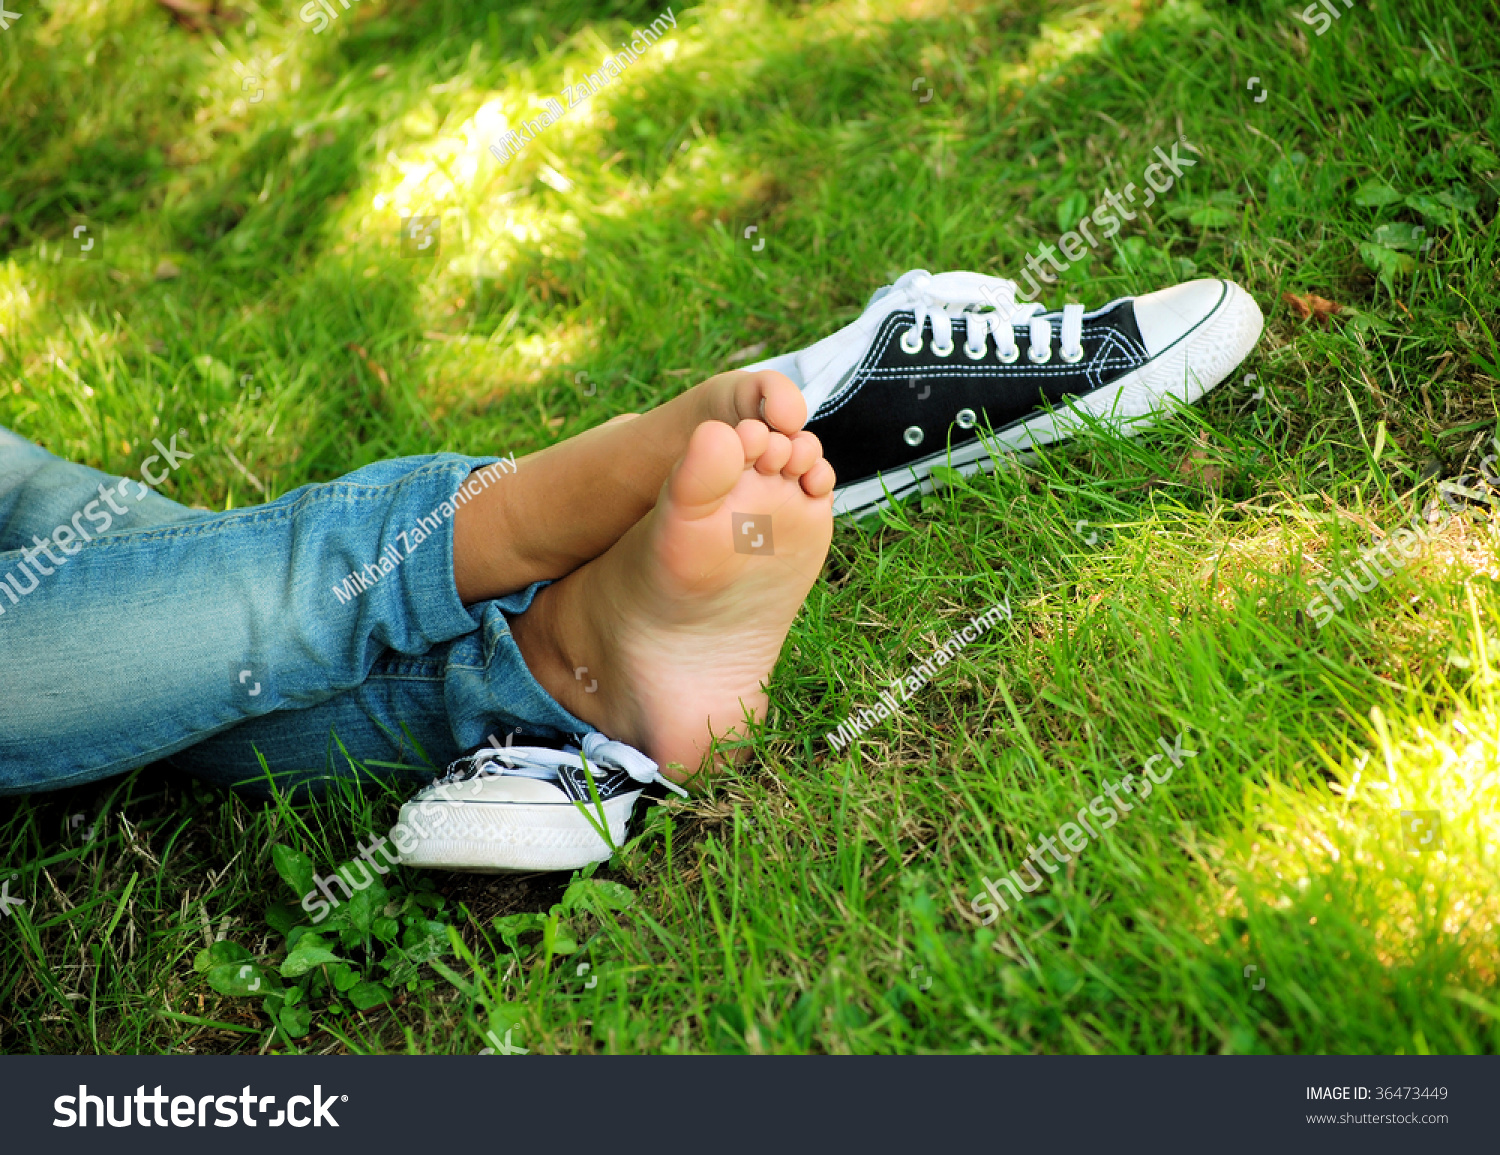 Feet Of The Girl Teenager And Gym Shoes On A Green Grass Of A Lawn In ...